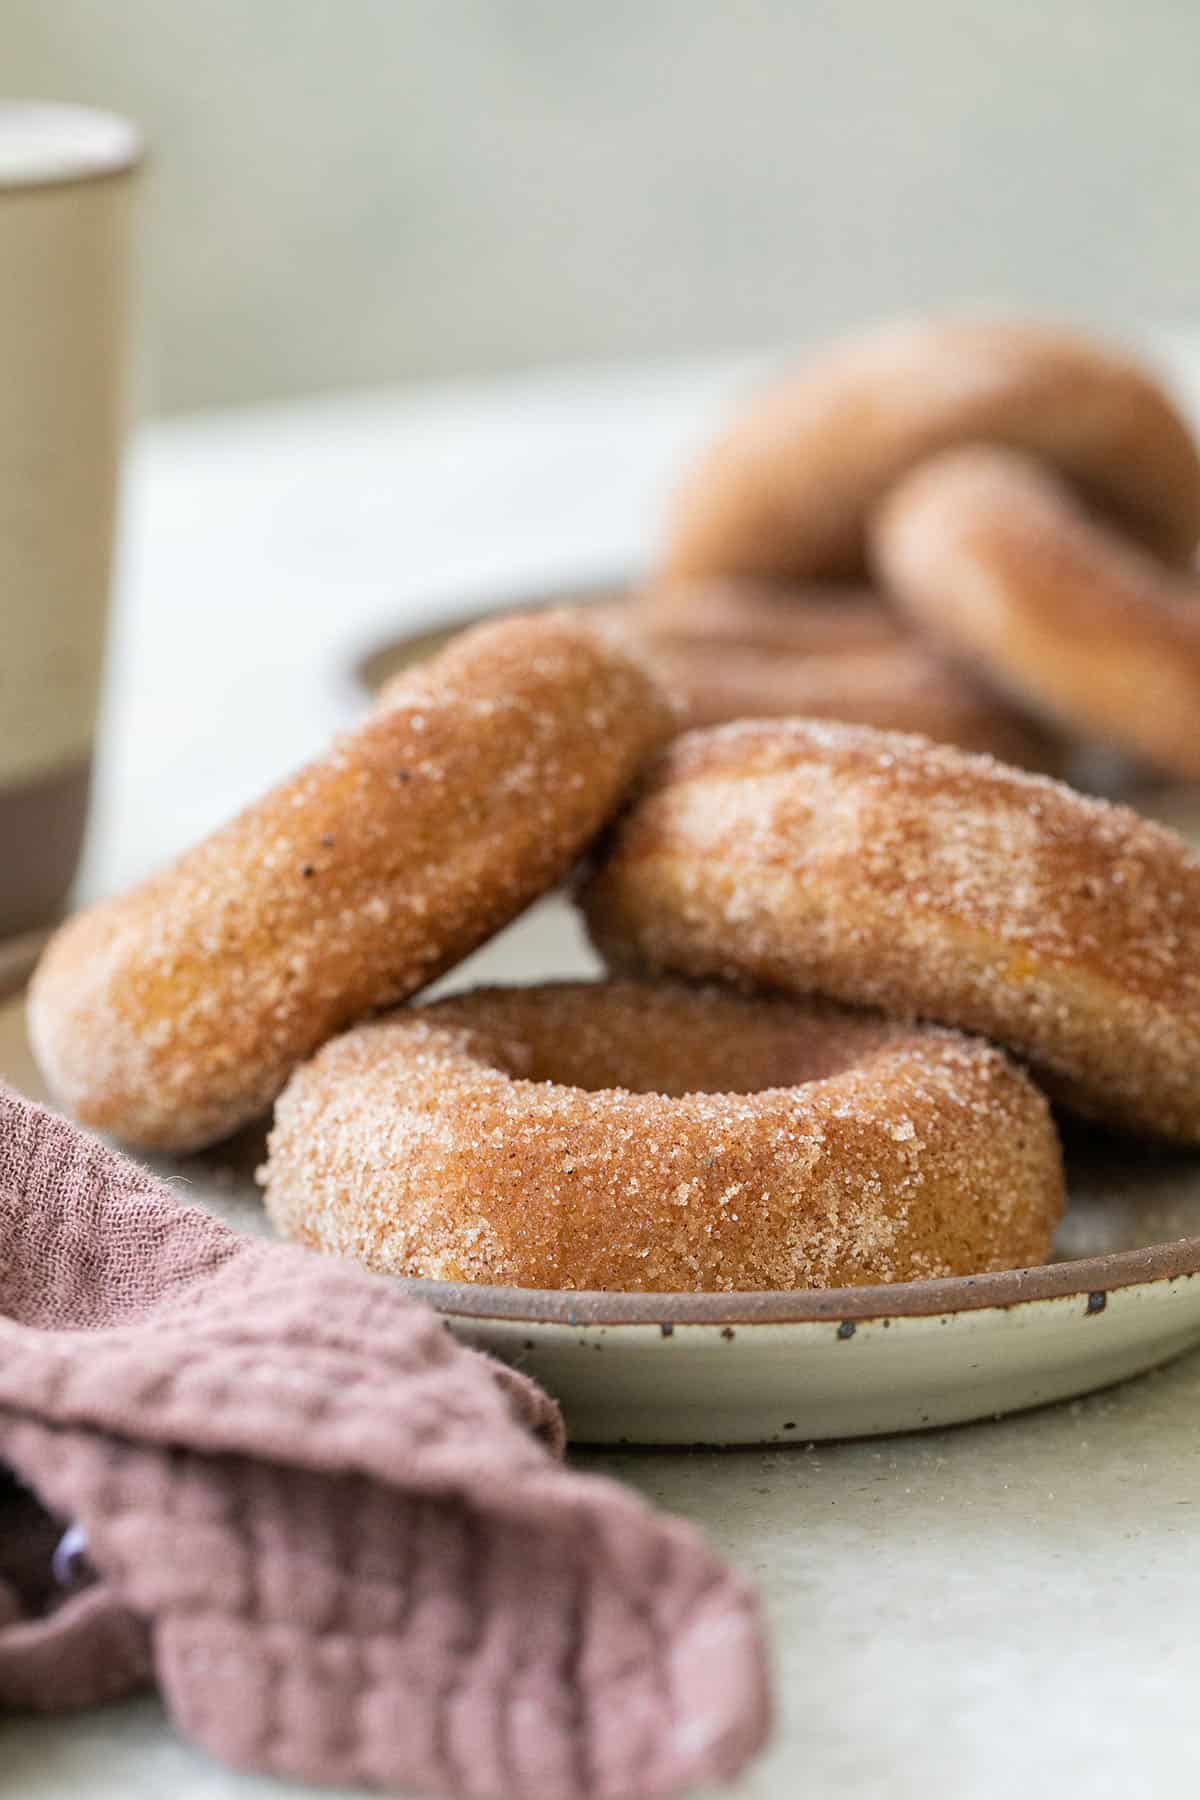 Baked apple cider donuts on a plate.